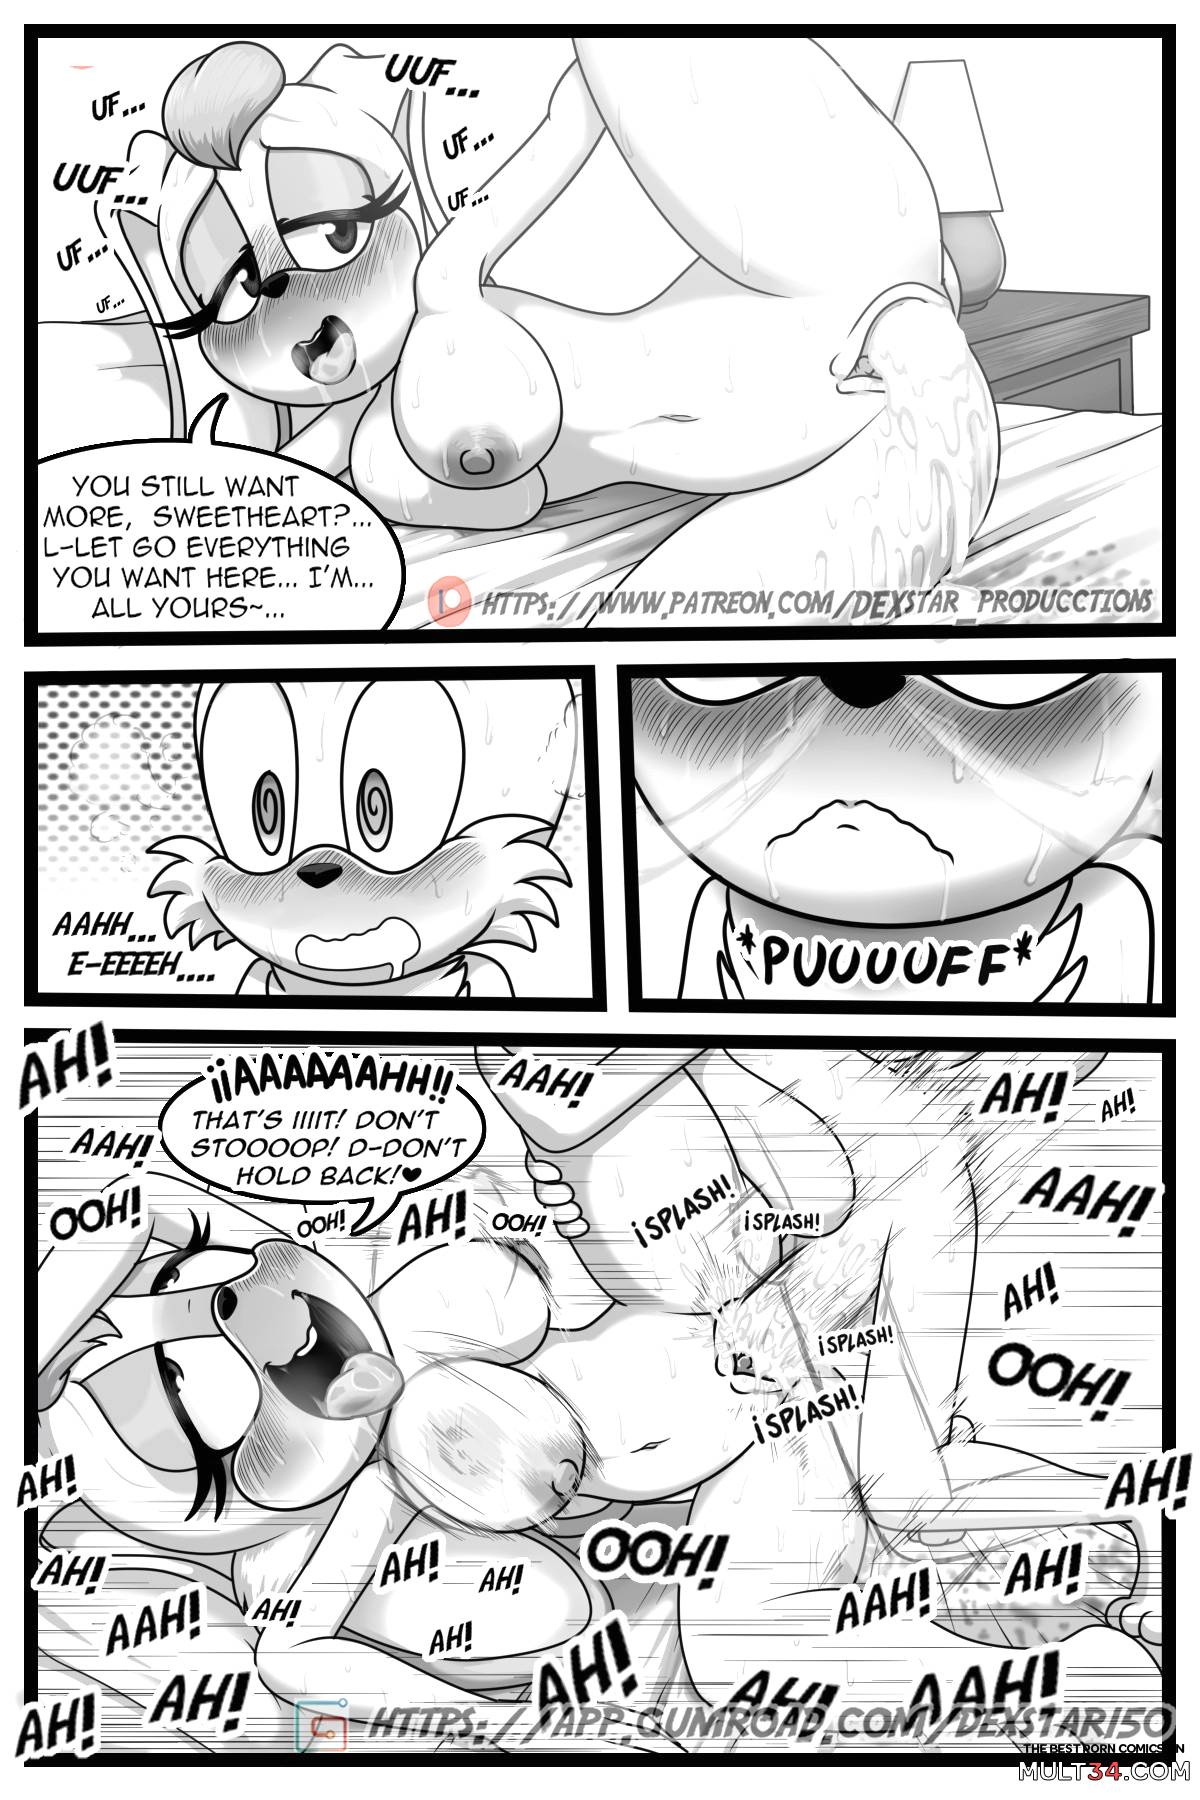 Please Fuck Me: Cream x Tail - Extra Story! page 22